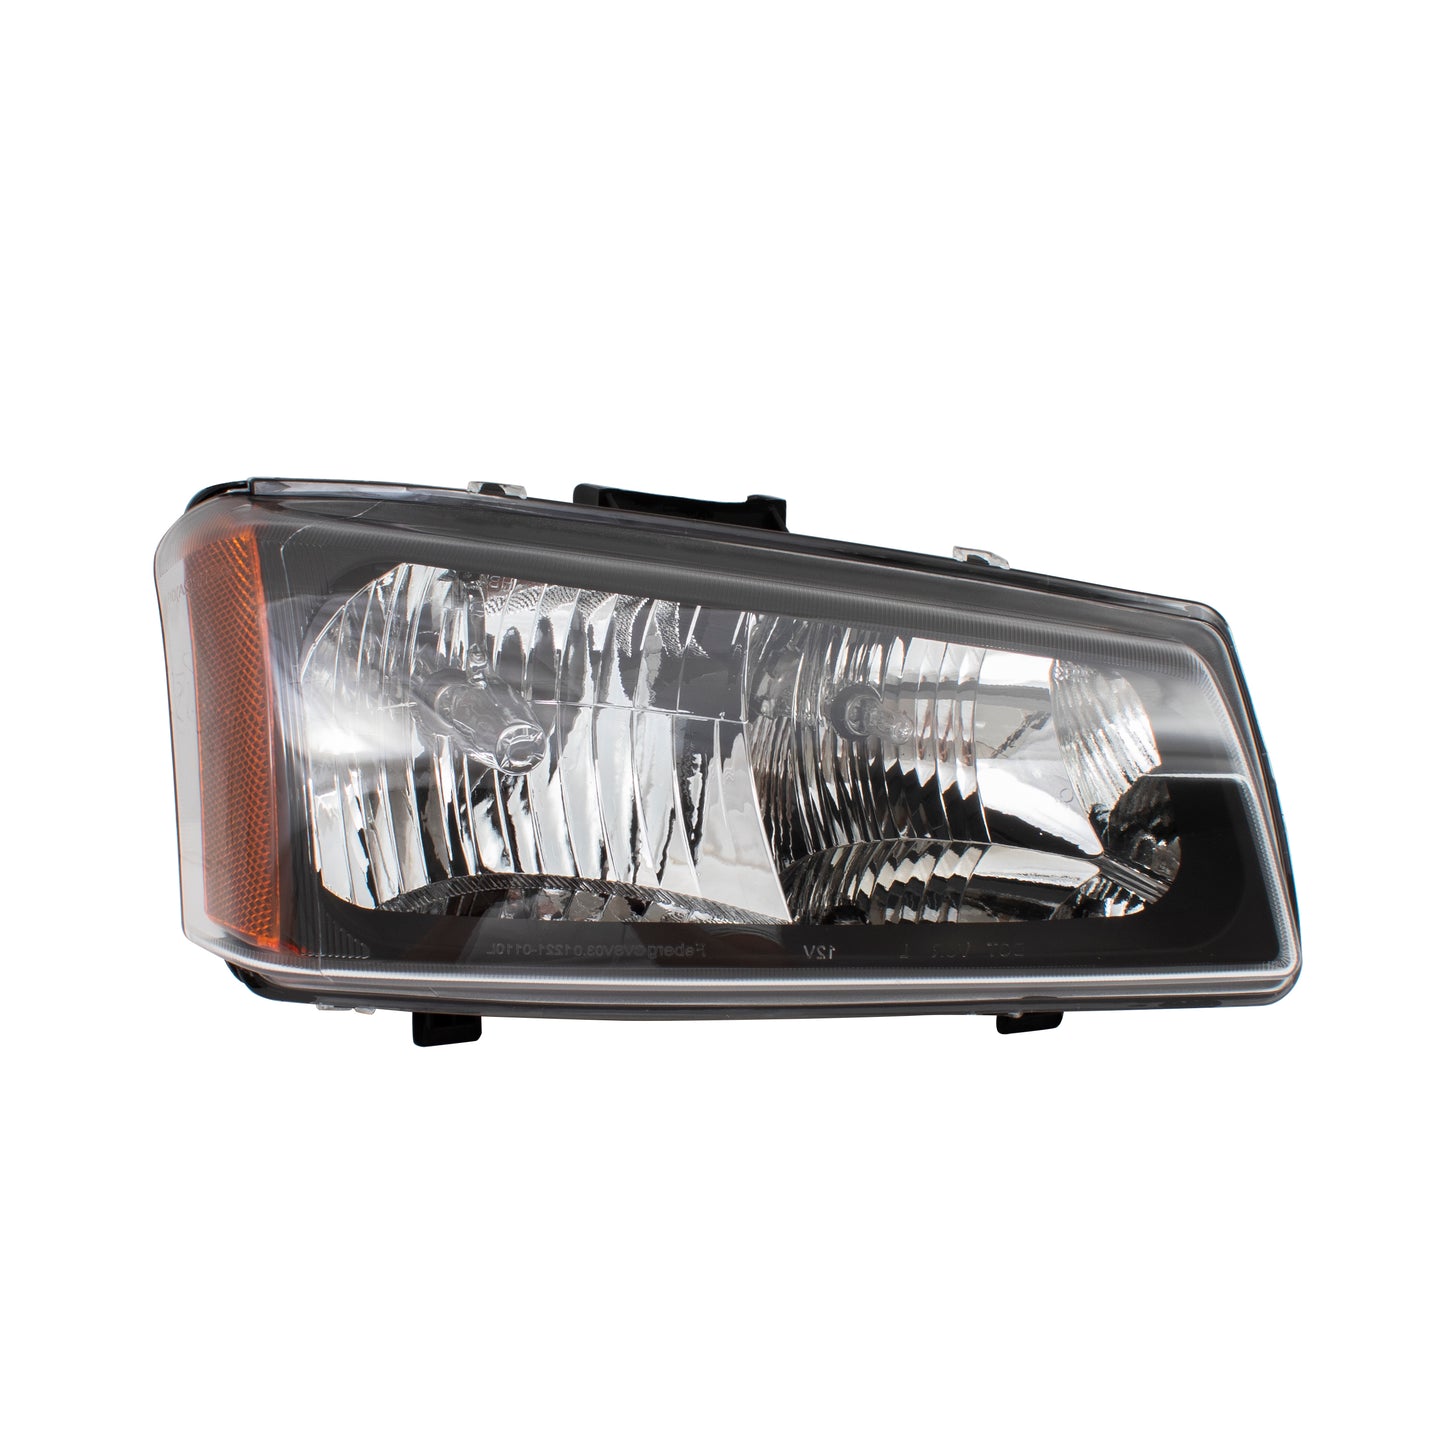 Brock Replacement Passengers Halogen Headlight Compatible with 03-06 Avalanche Silverado 07 Classic